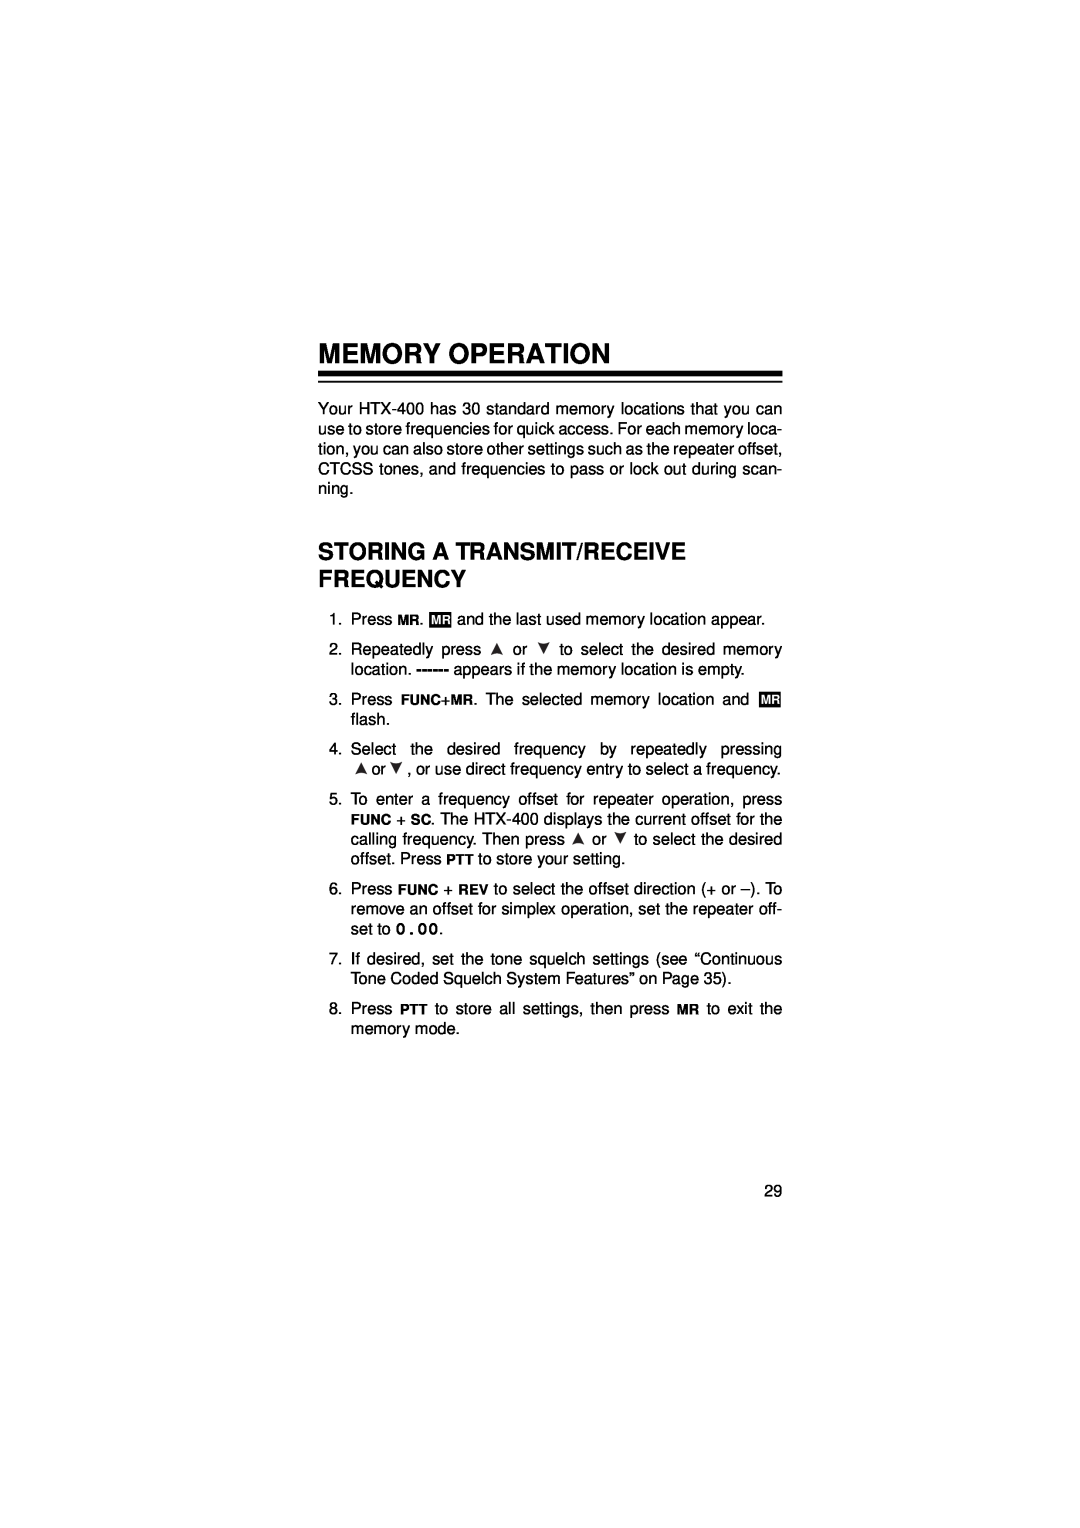 Radio Shack HTX-400 owner manual Memory Operation, Storing A Transmit/Receive Frequency 